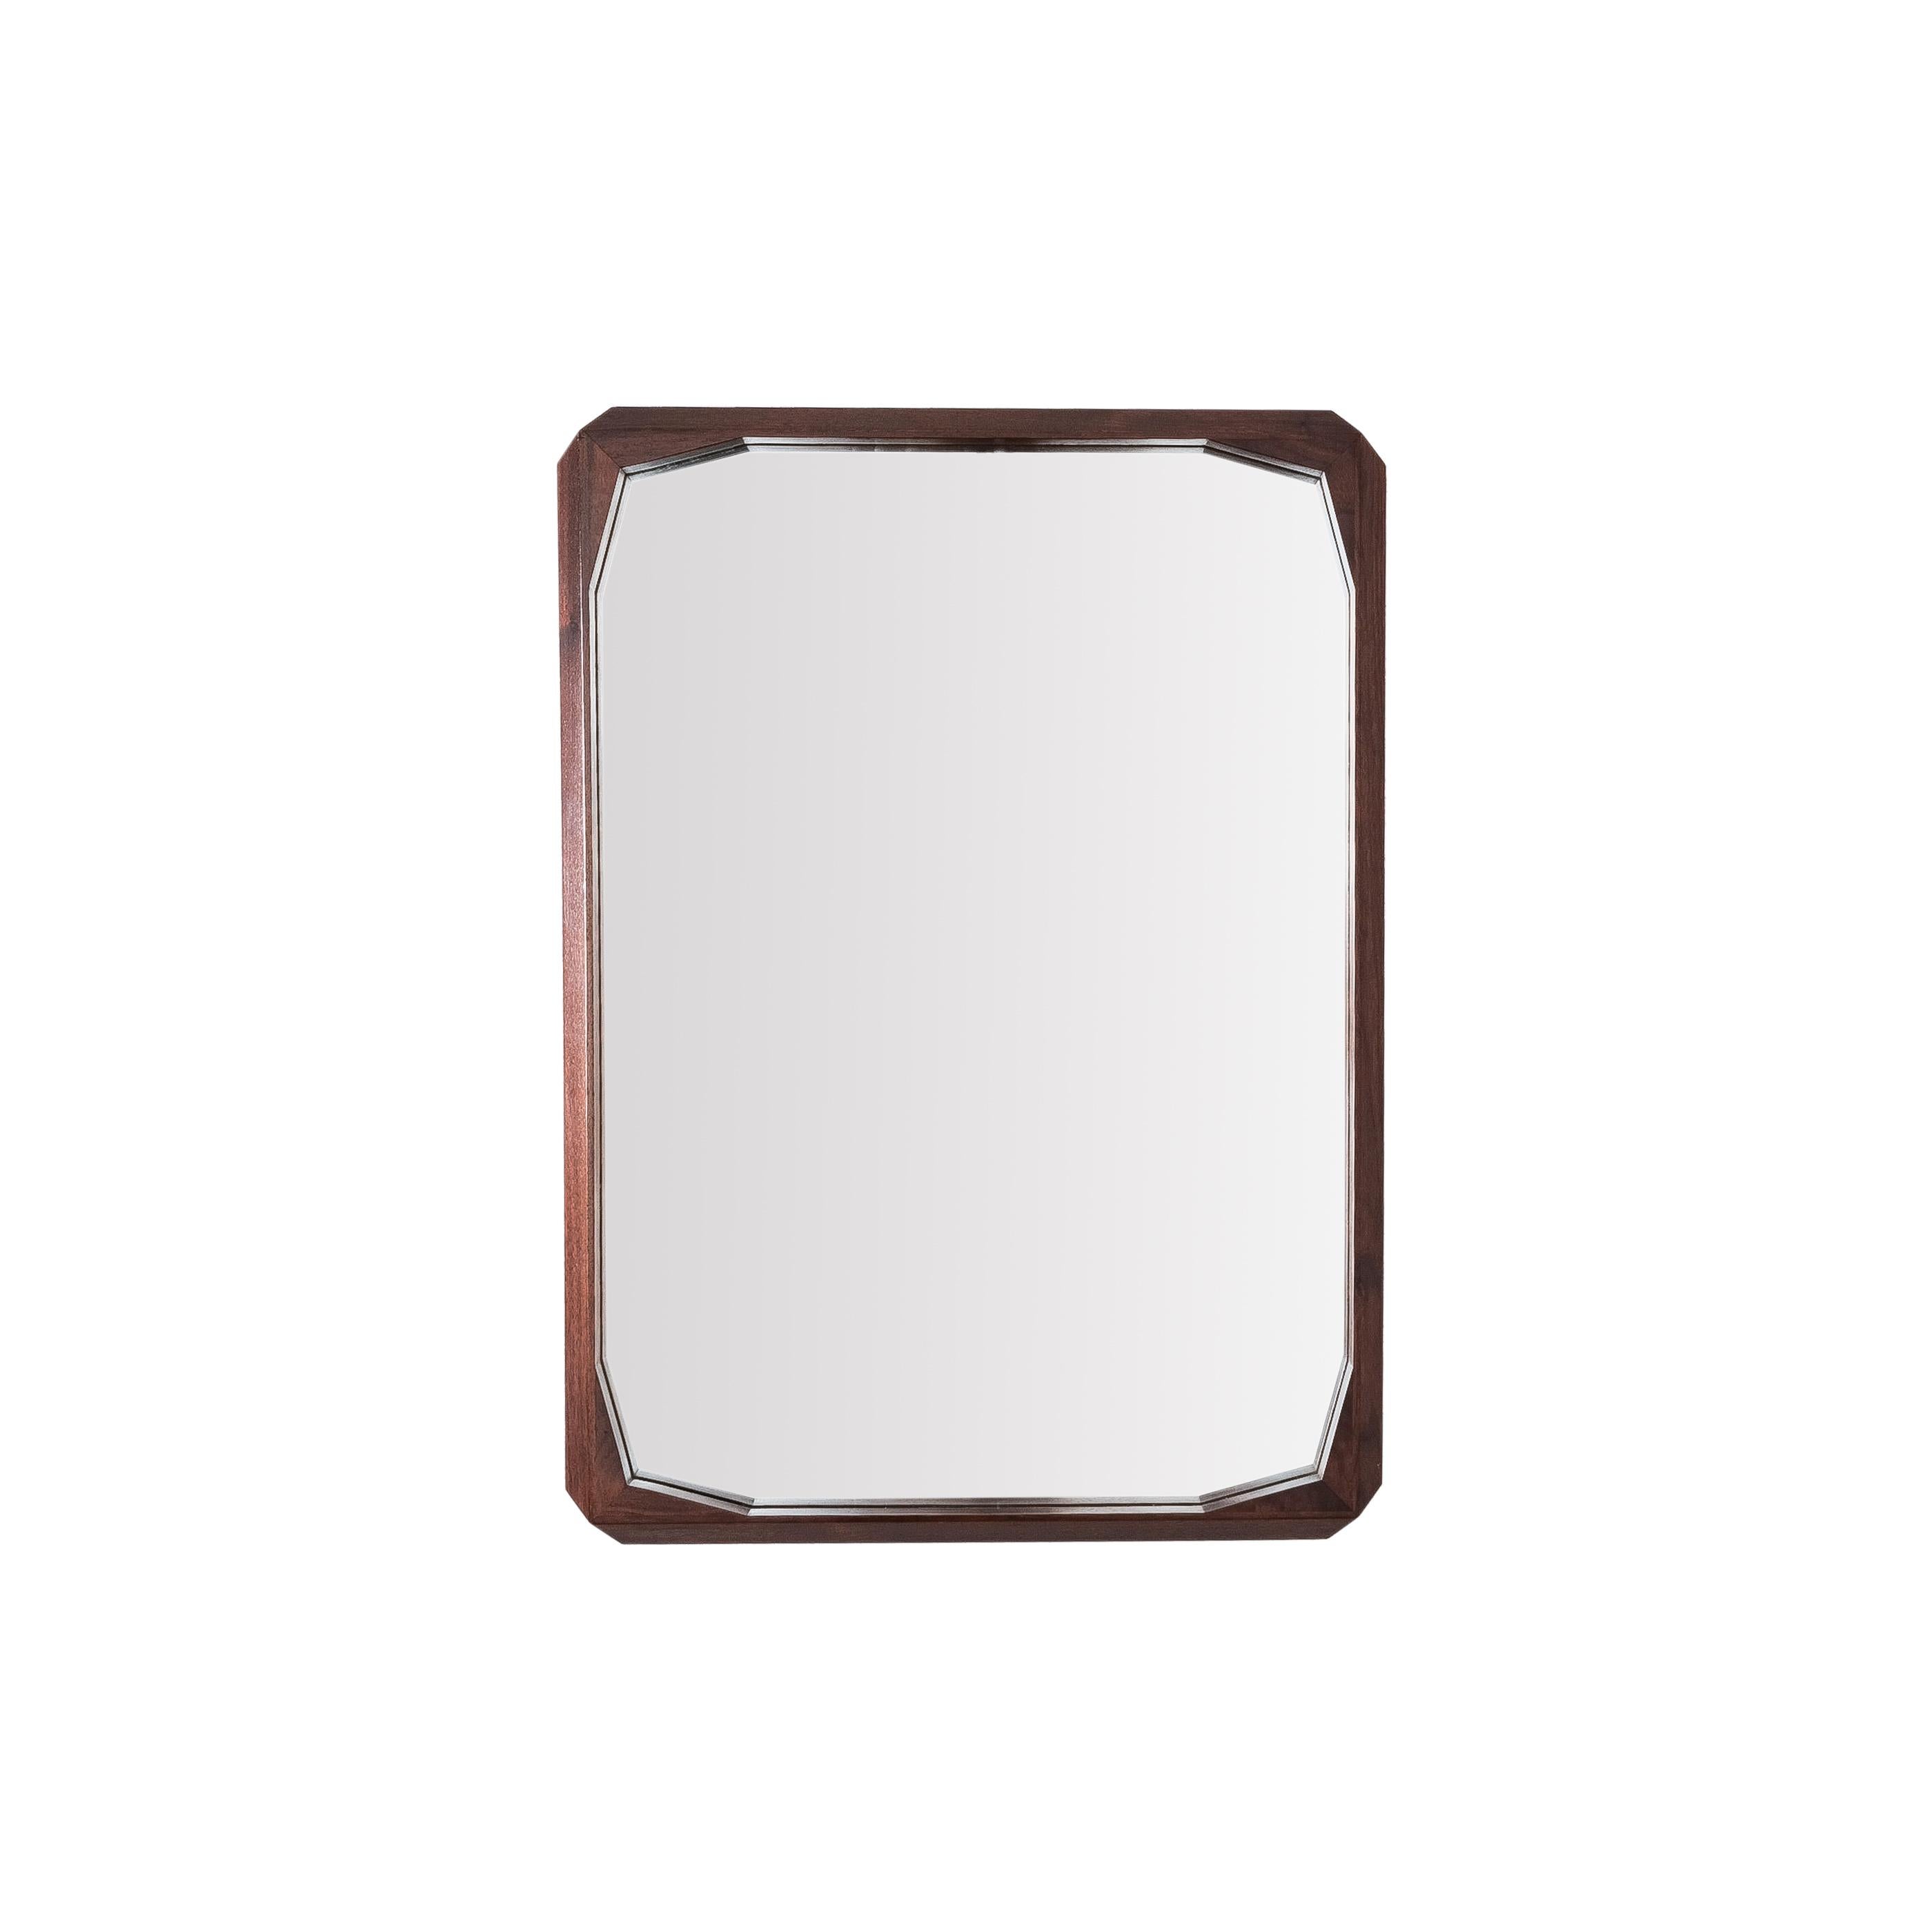 Rectangular walnut mirror by Dino Cavalli, 1960's, Italy

Dino Cavalli vintage walnut-wood mirror, midcentury, Italy. This mirror is in very good condition, with no cracks, chips or damages to the wood or glass. Superficial wear according to time